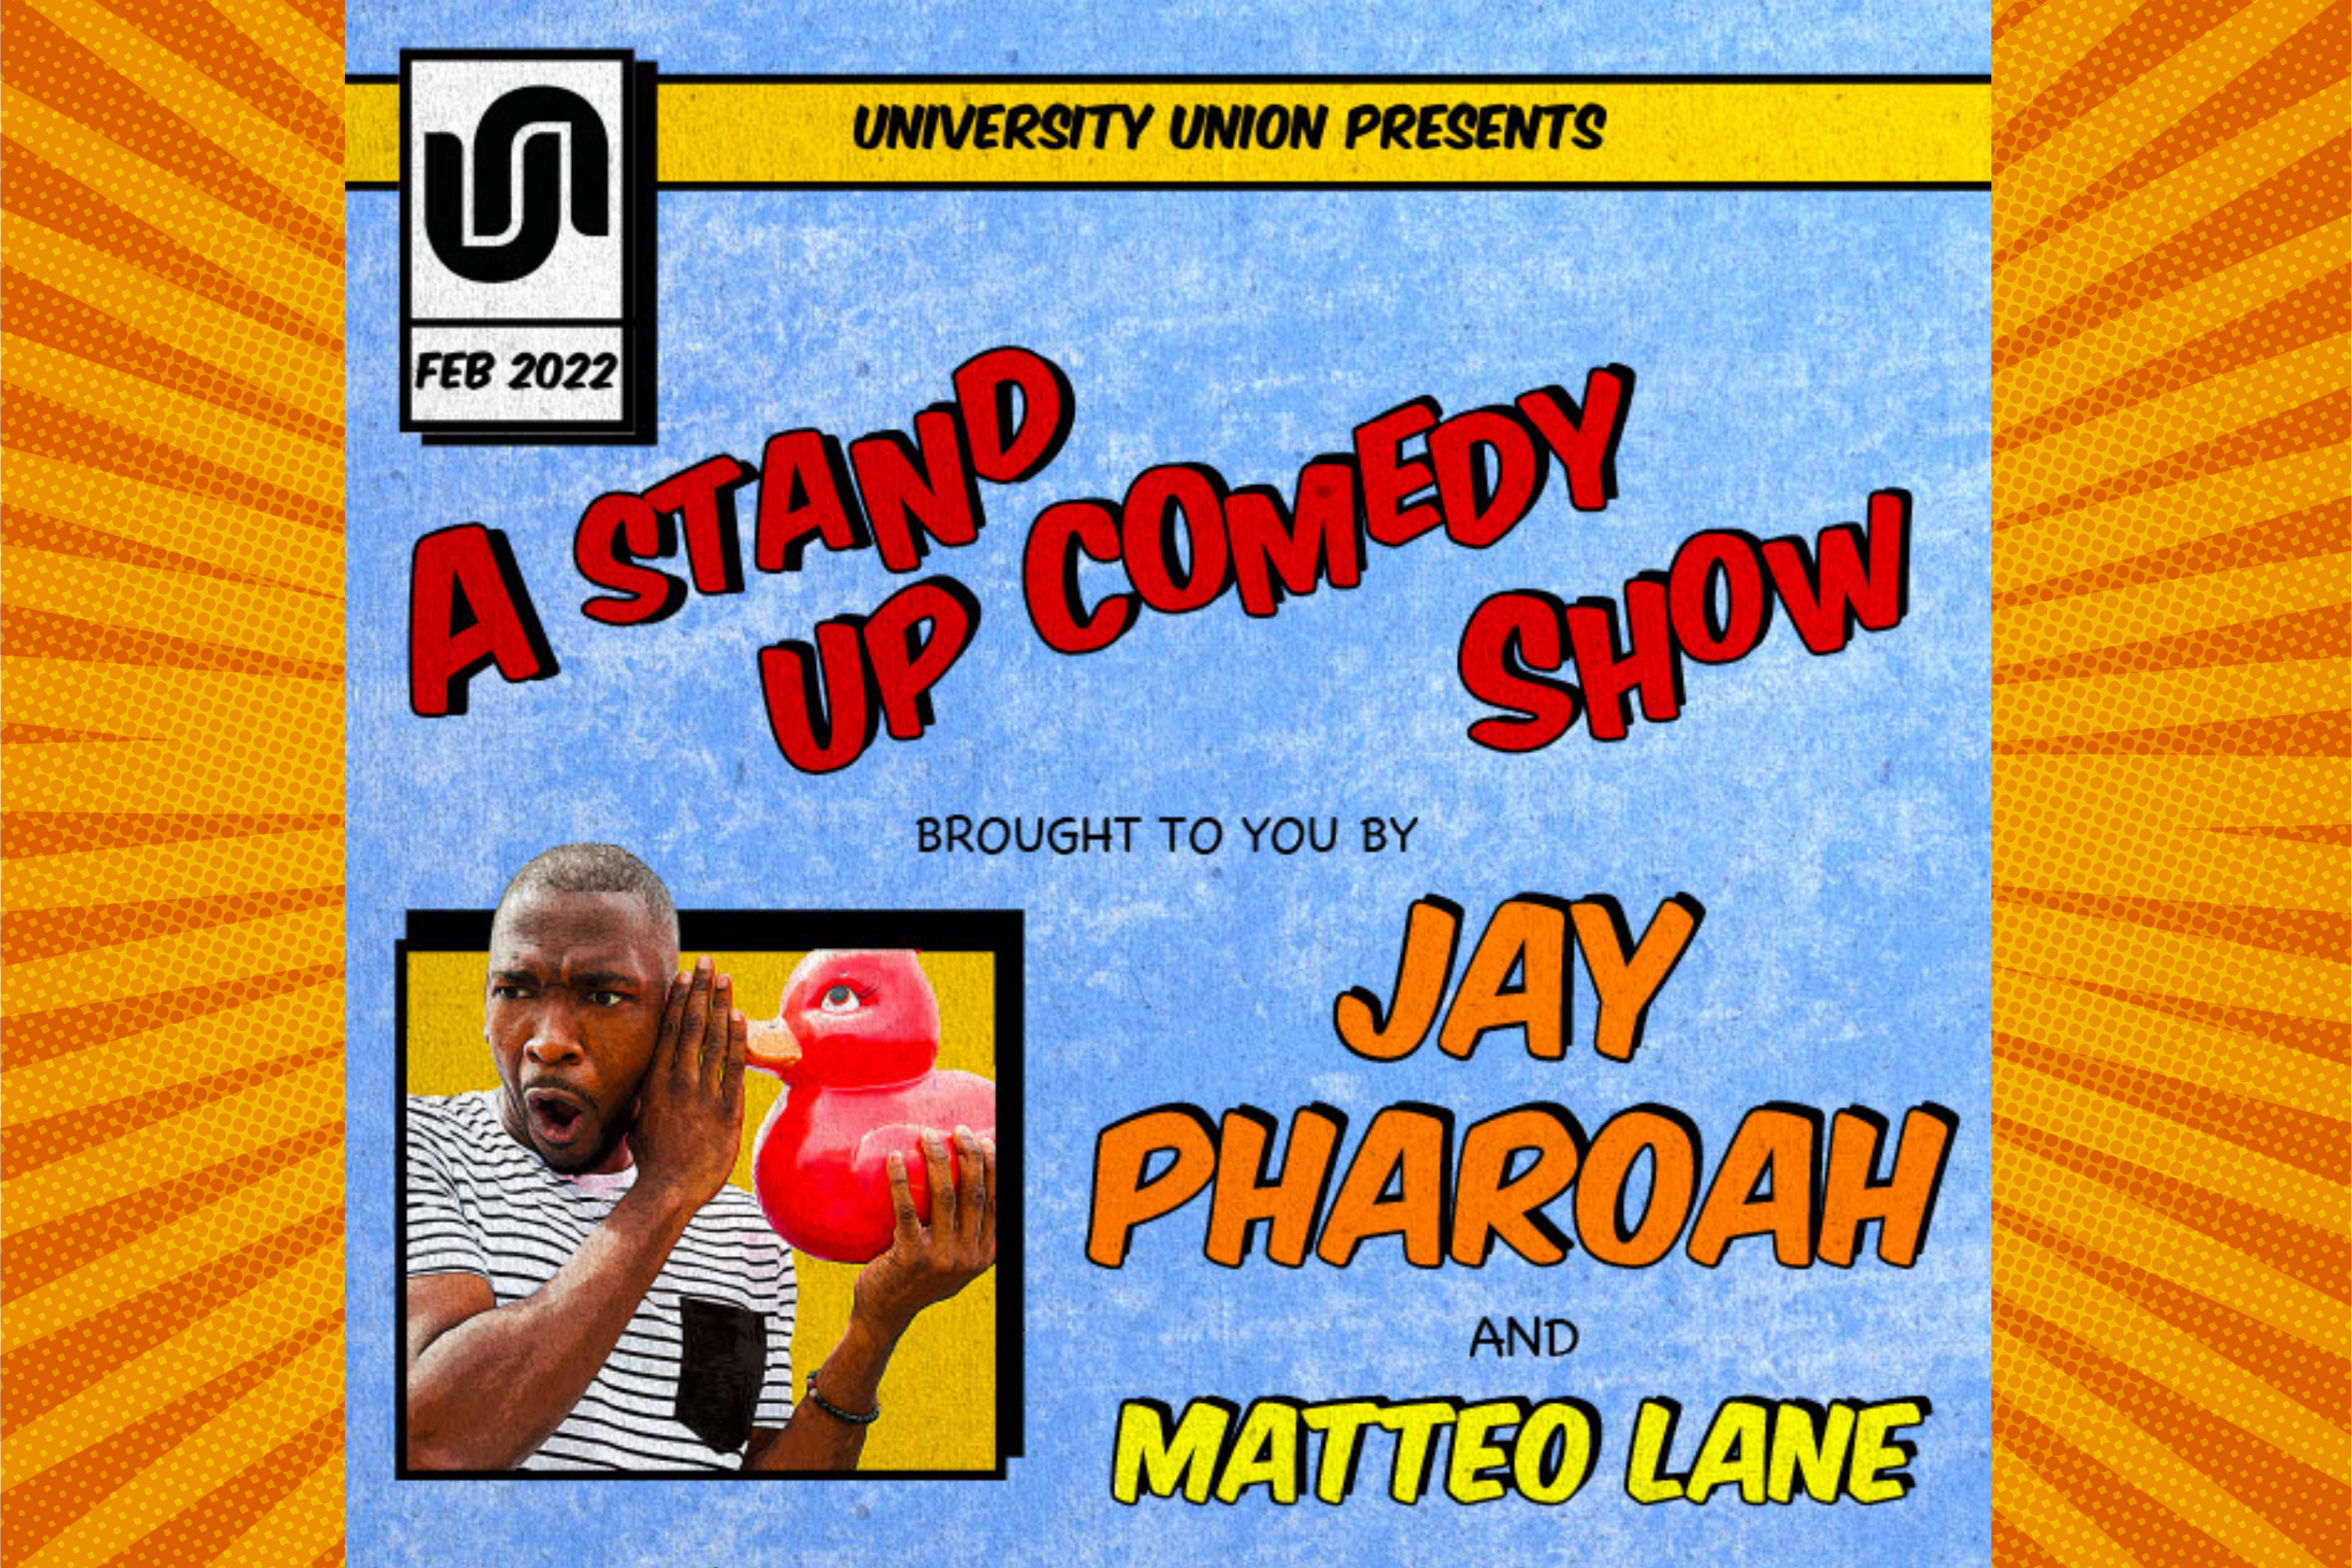 University Union's comedy event poster. Reads. "A stand up comedy event brough to you by Jay Pharoah and Matteo Lane." A picture of Jay Pharaoh listening to a giant, pink rubber duck is in the bottom corner.